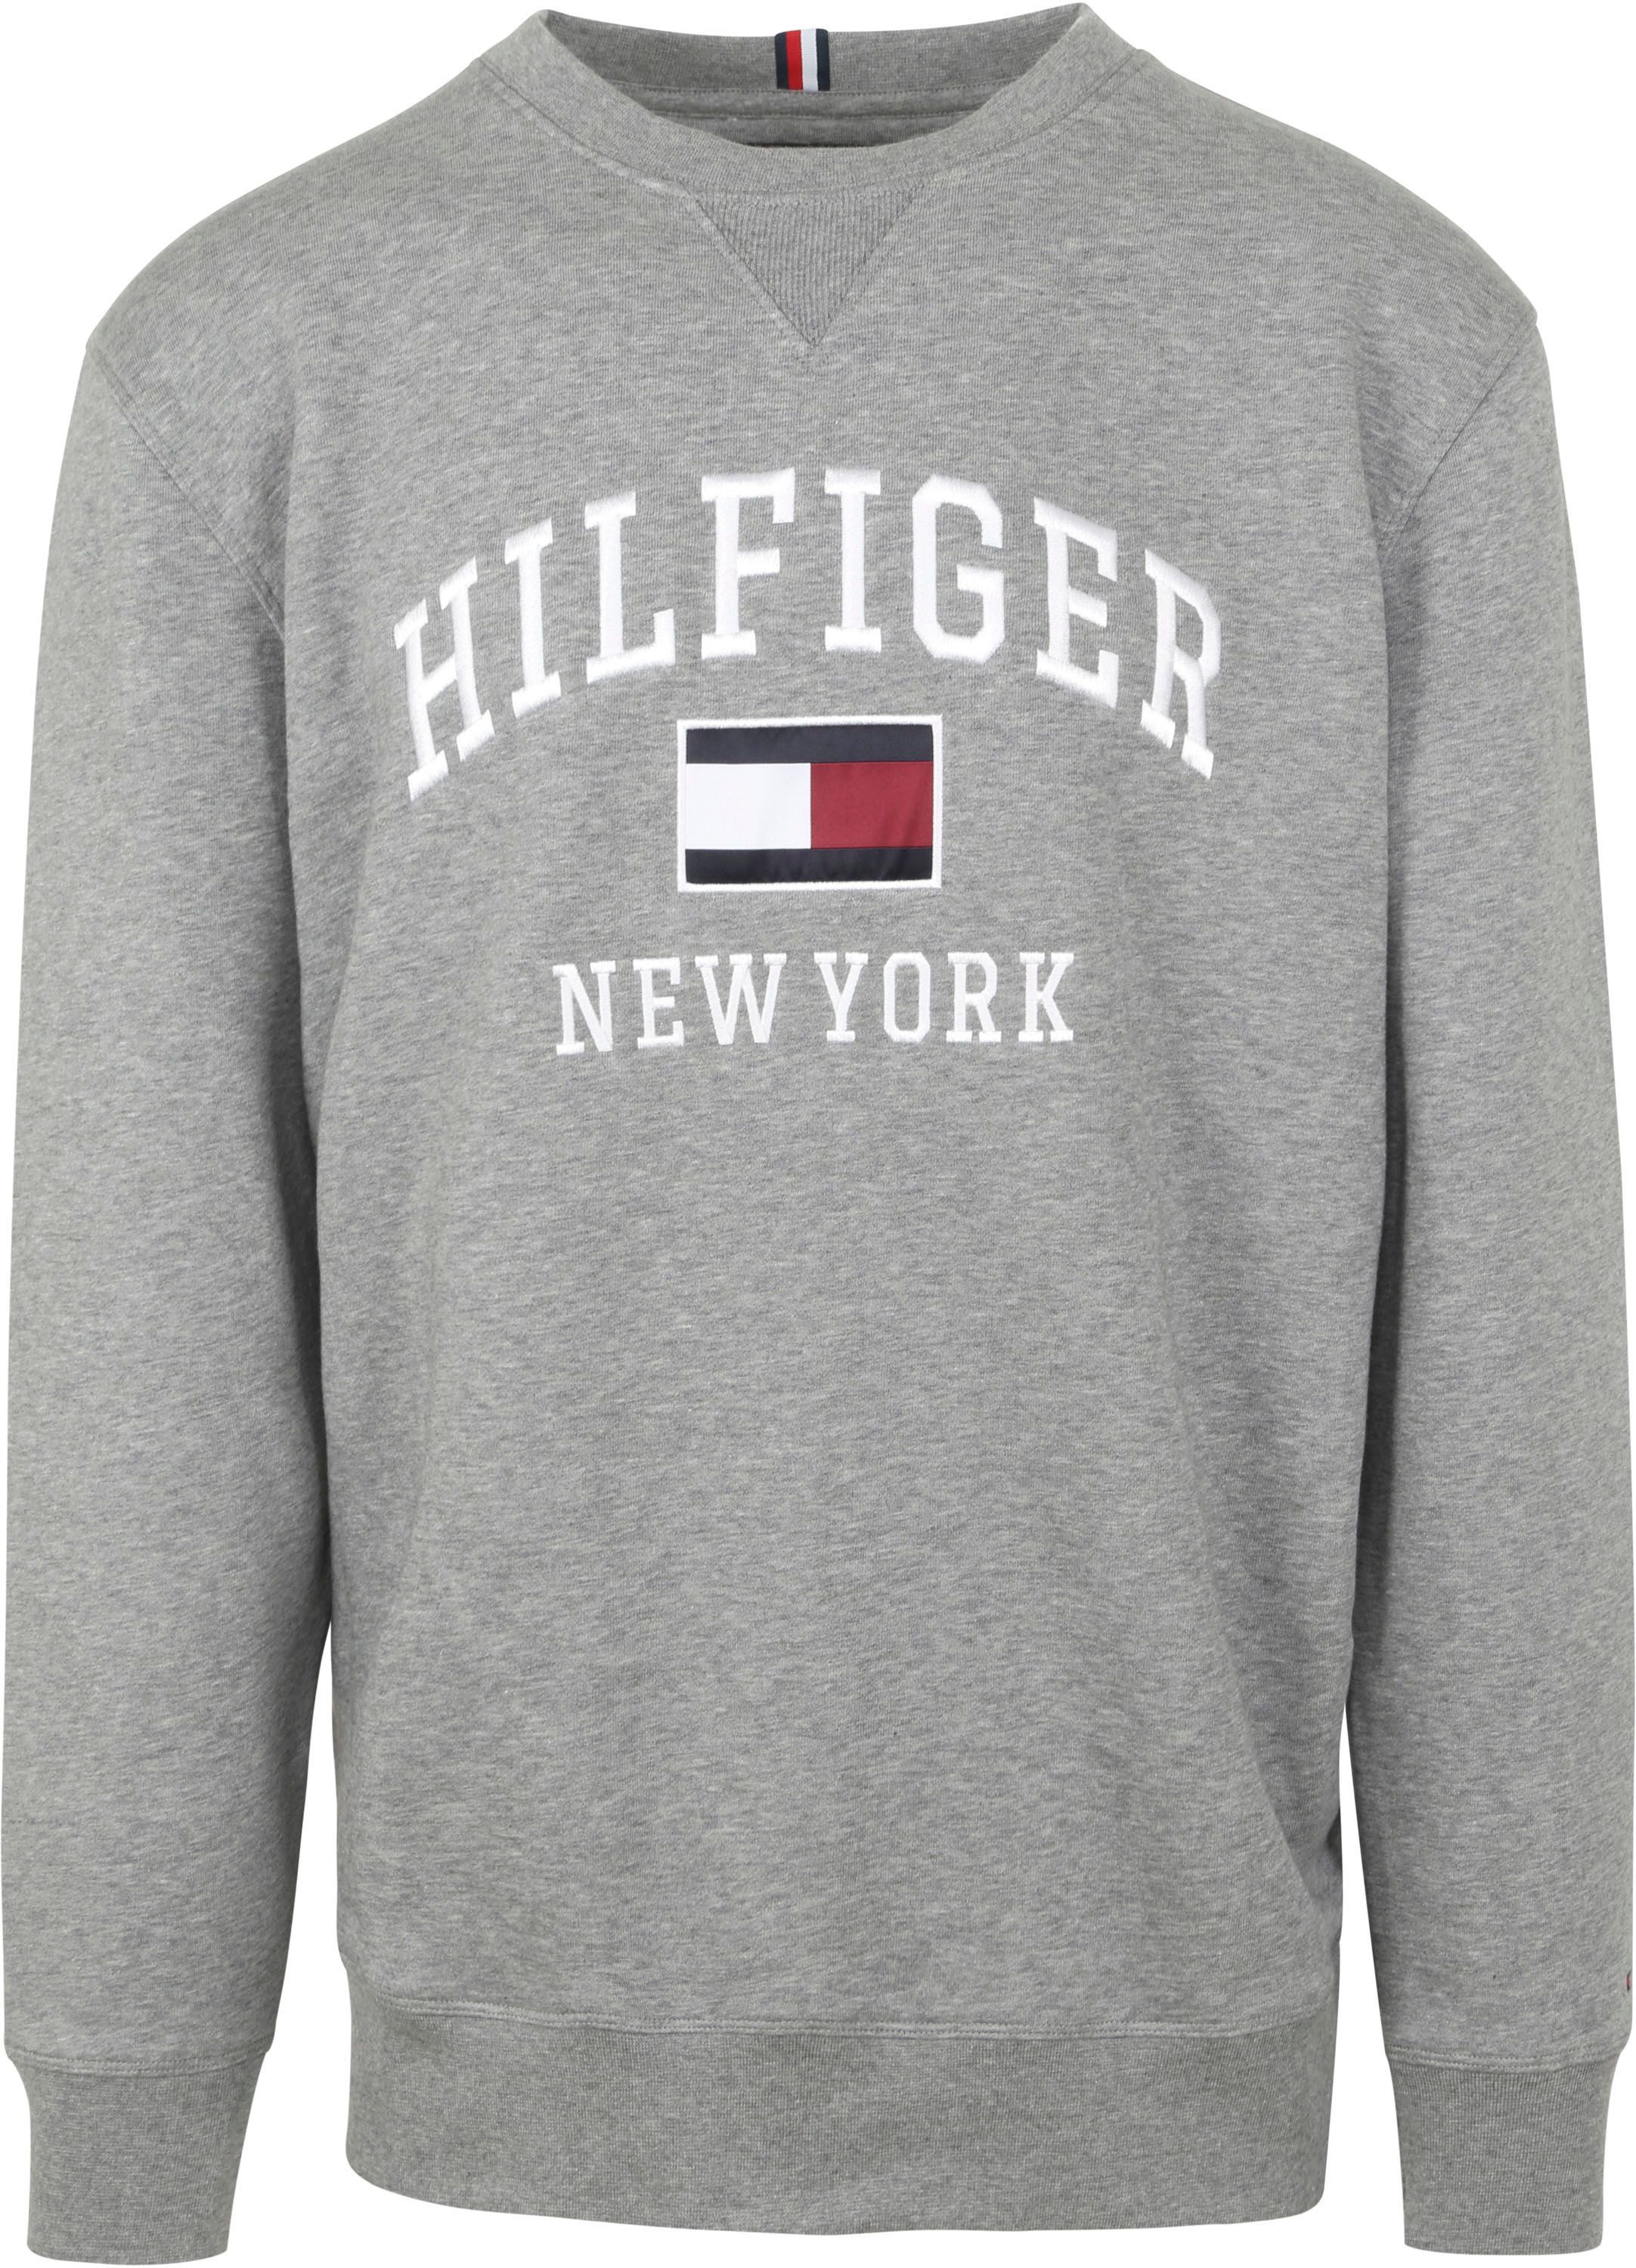 Tommy Hilfiger Big and Tall Sweater Grey size 3XL